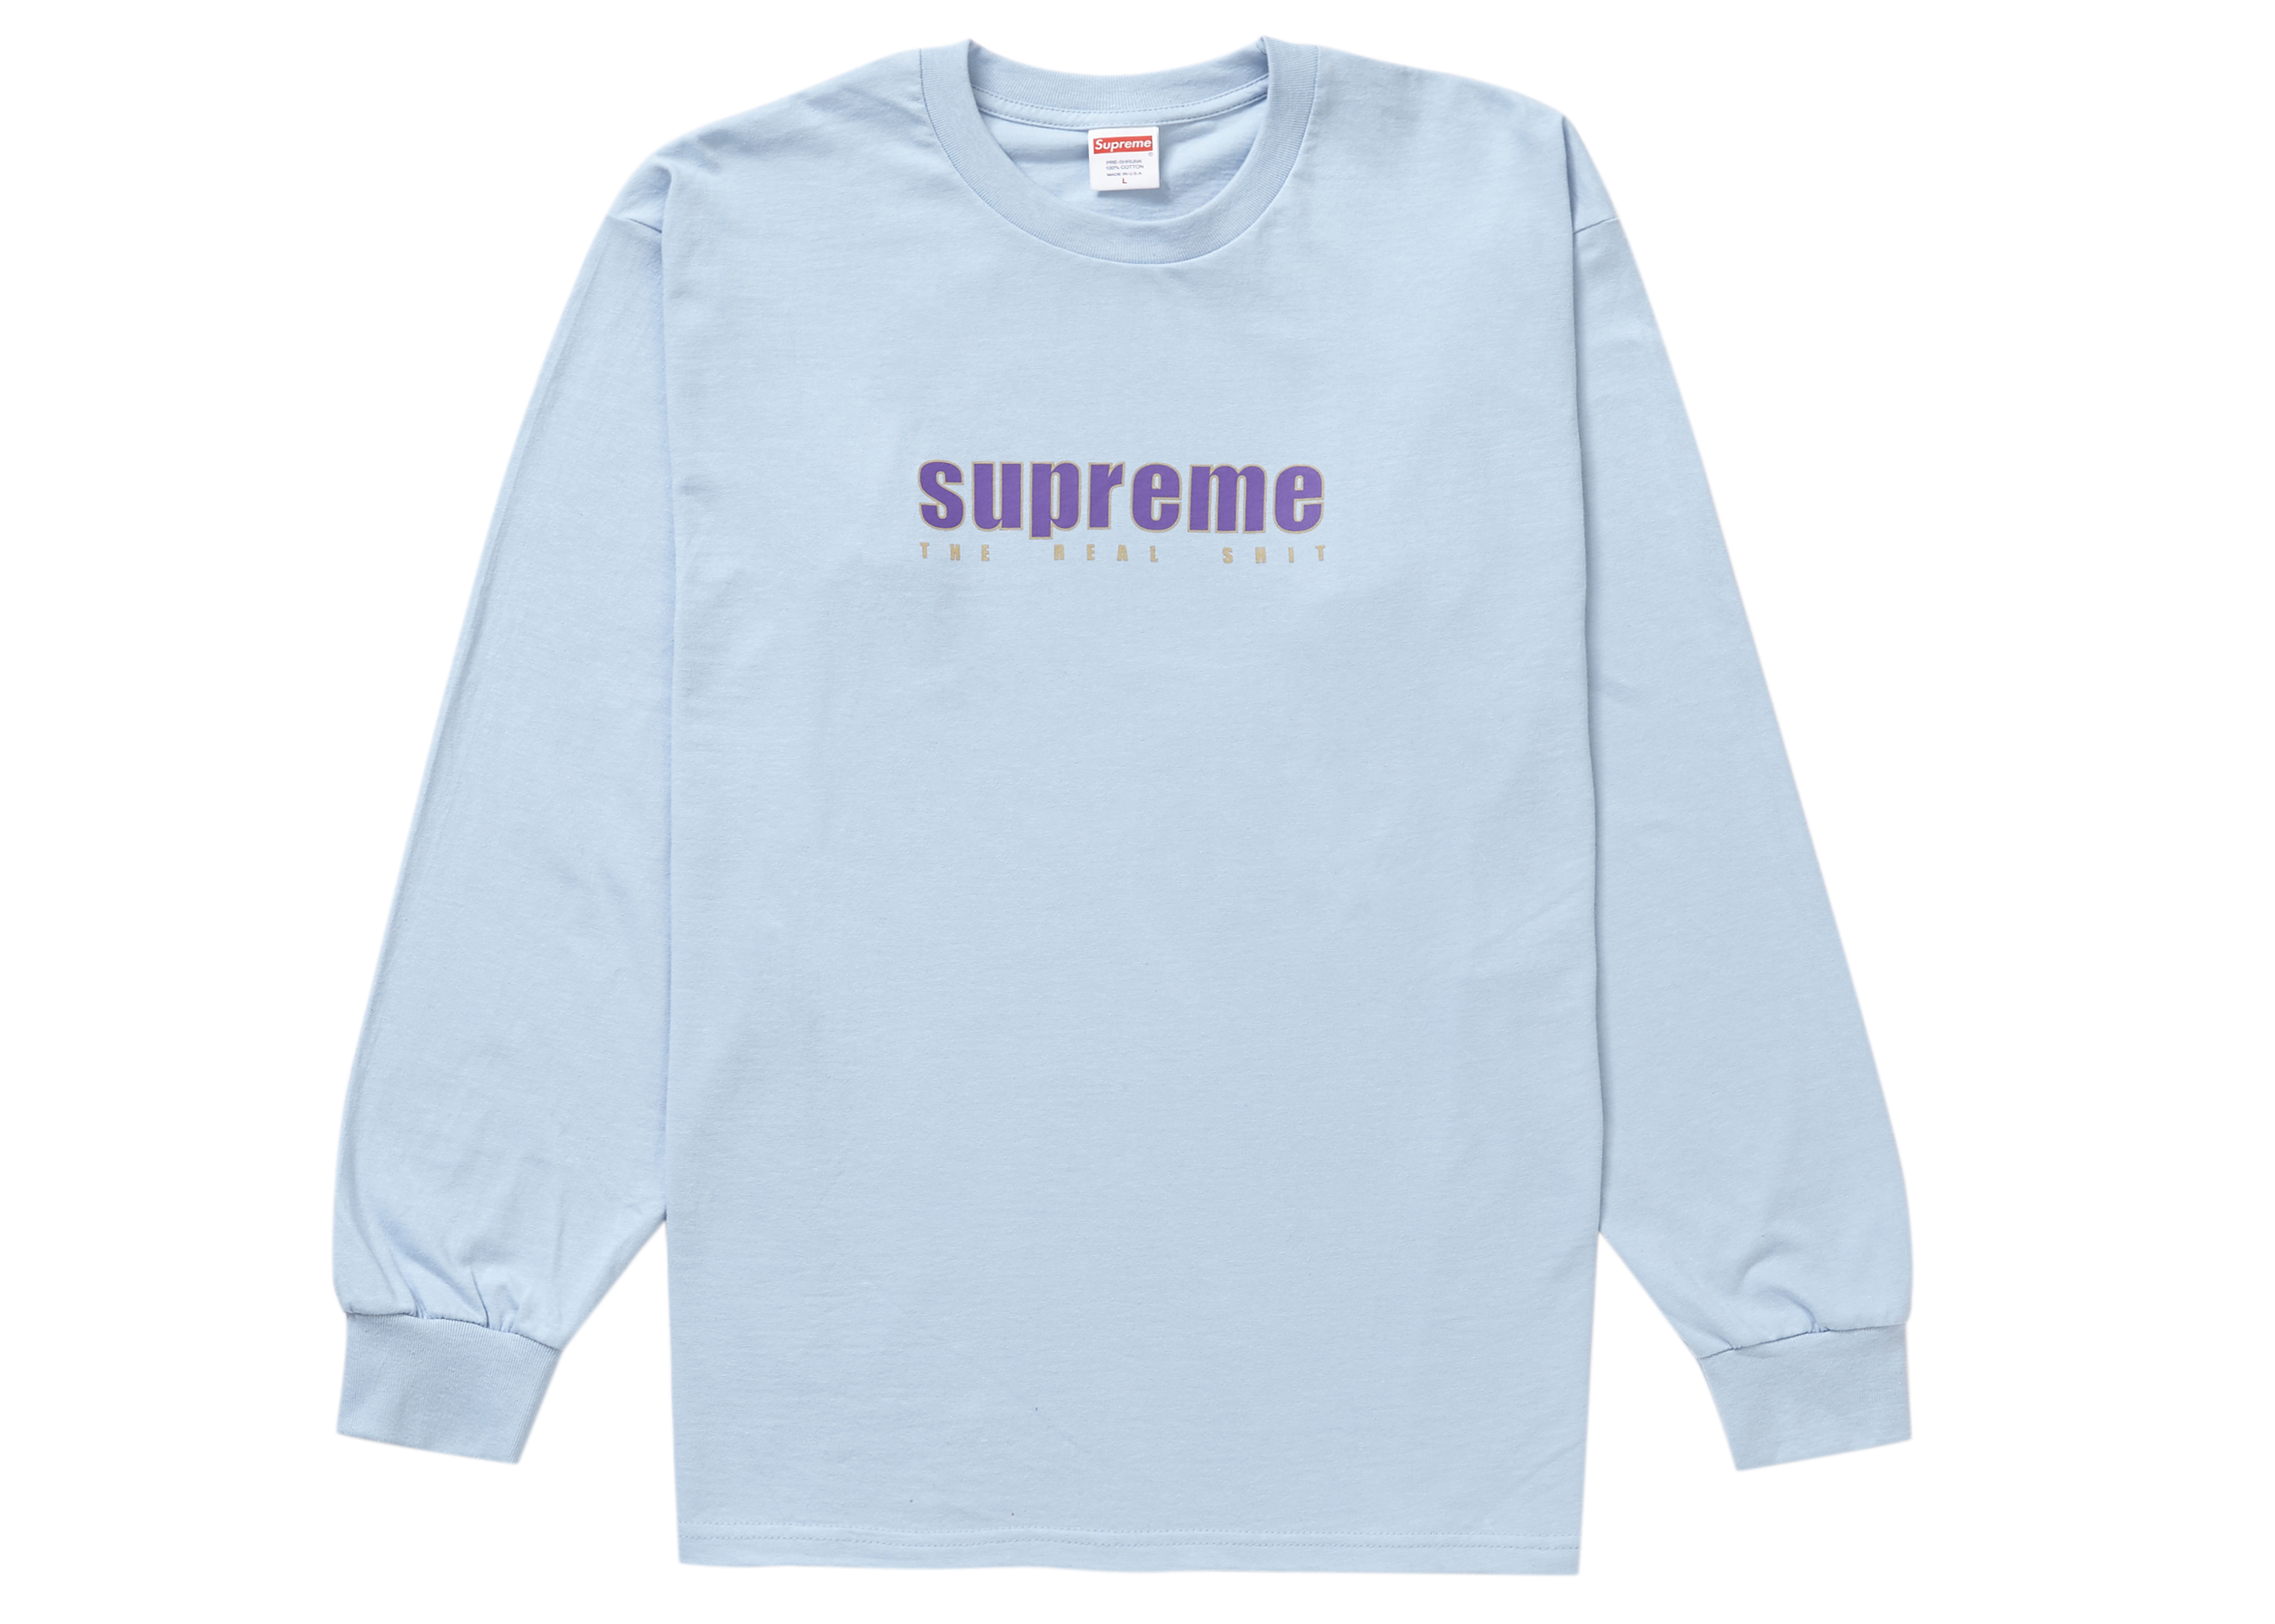 Supreme The Real Shit L/S Tee Light Blue - SS19 - US